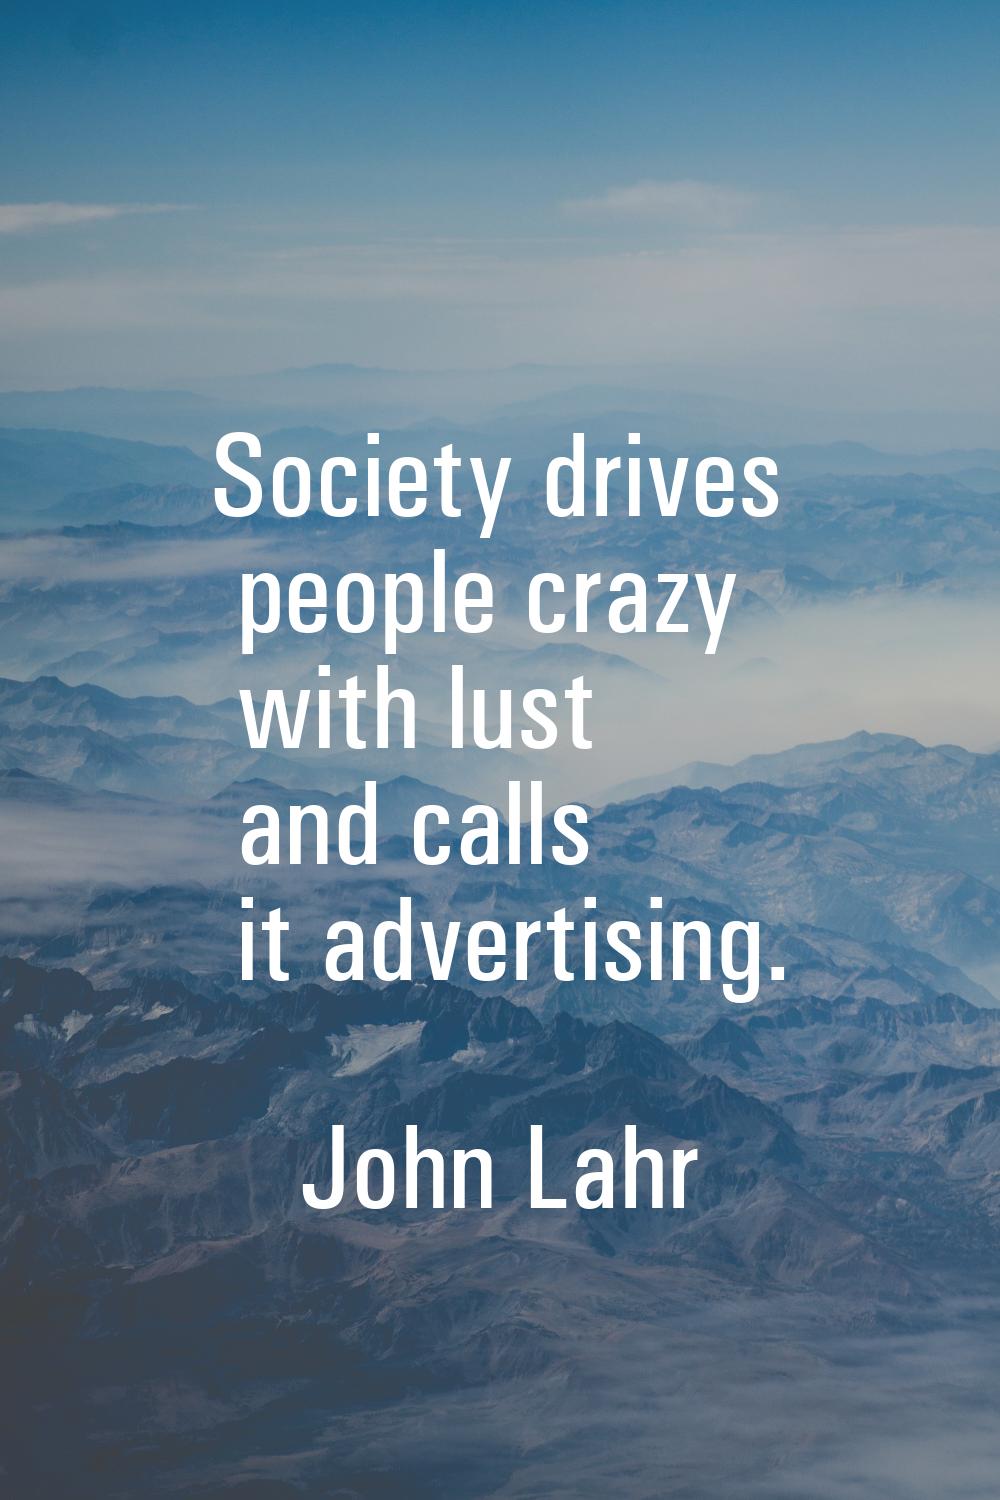 Society drives people crazy with lust and calls it advertising.